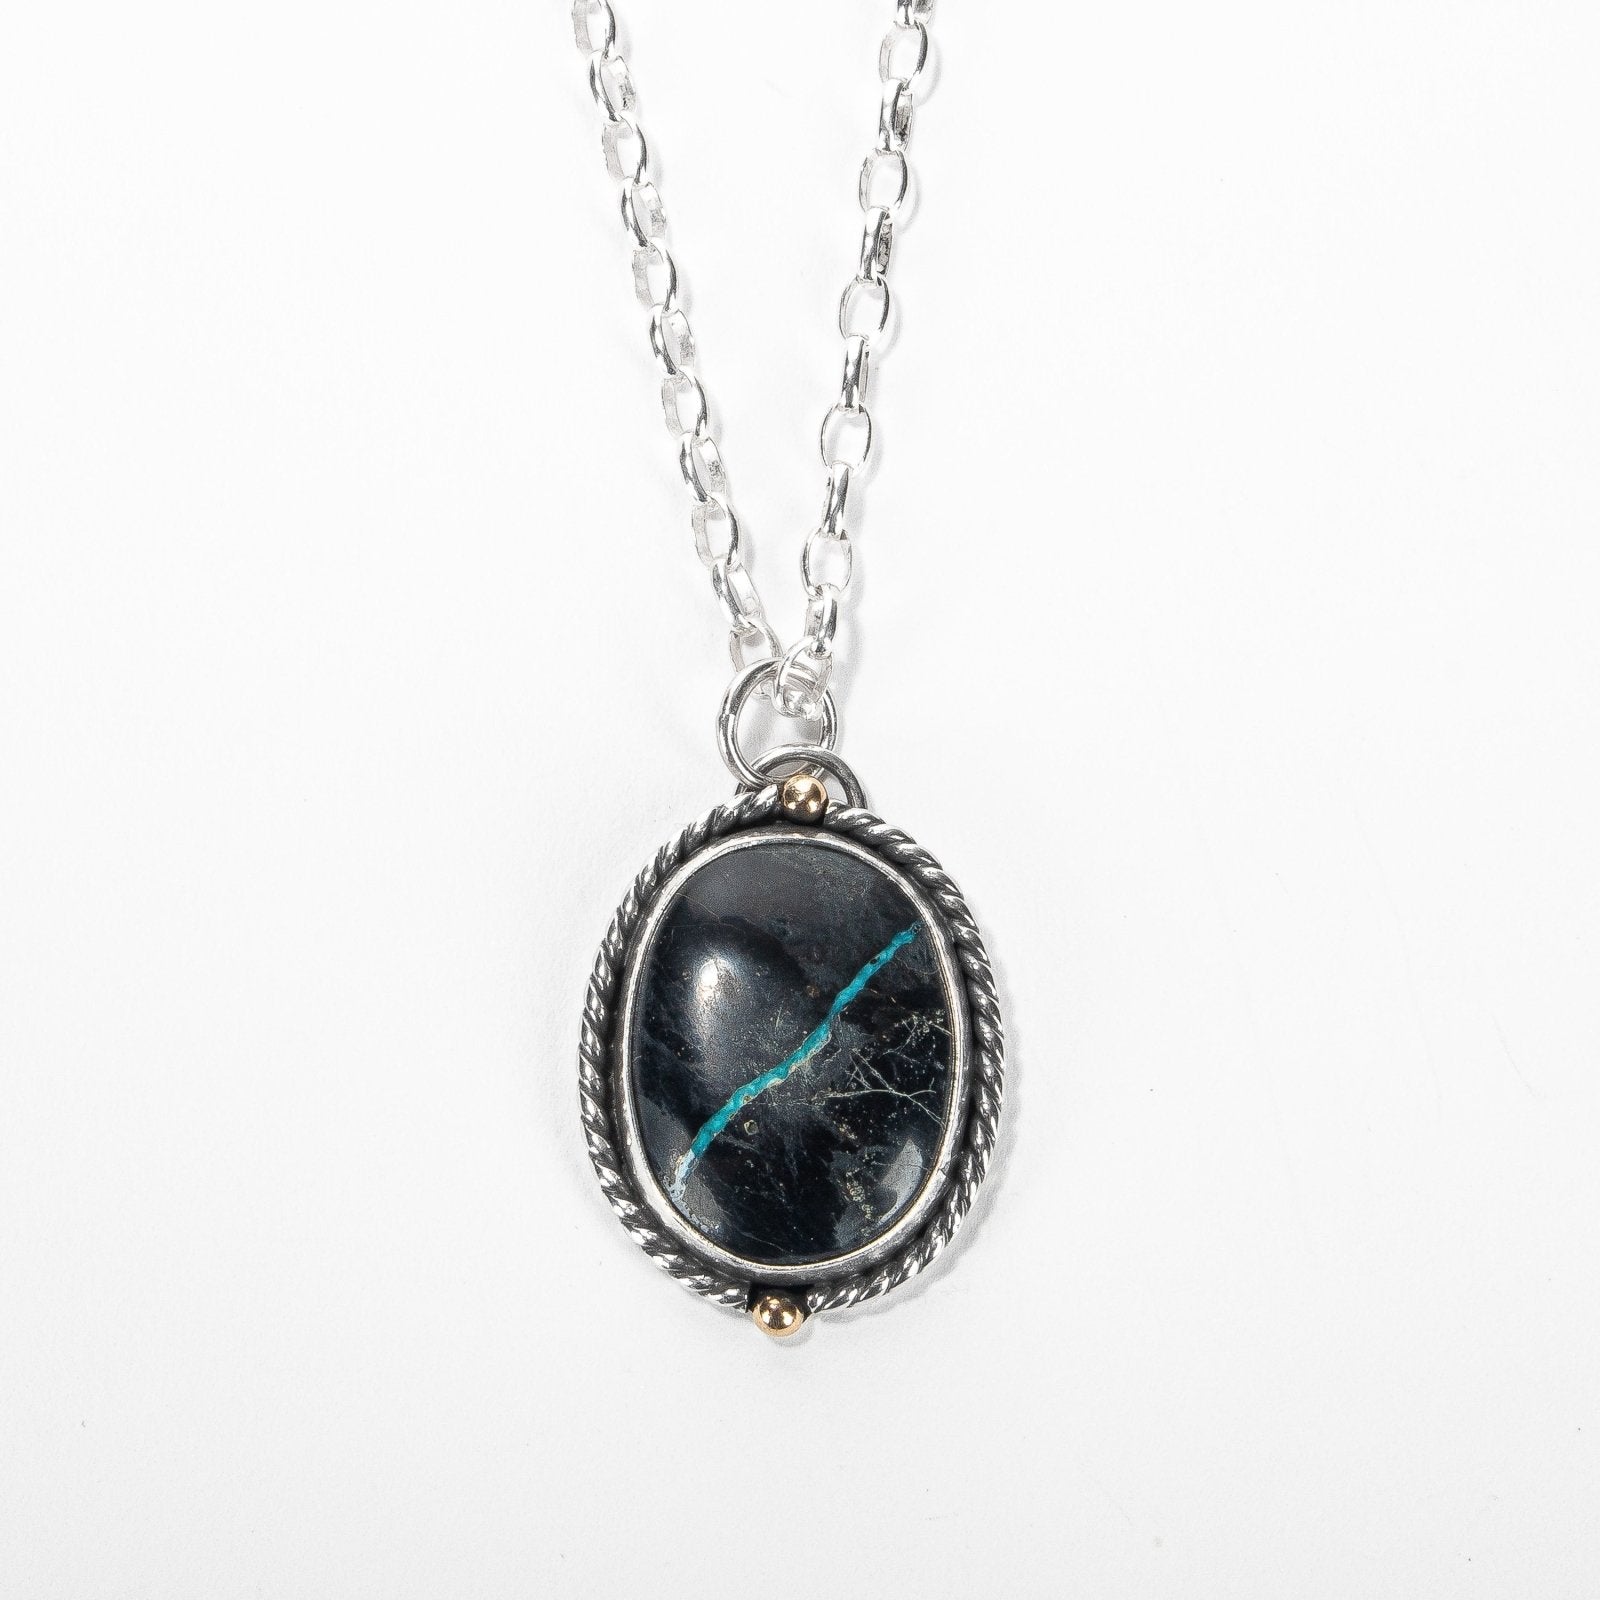 Black Viking Ribbon Turquoise Necklace - Melanie Golden Jewelry - gemstone necklace, necklace, necklaces, The River Valley Collection